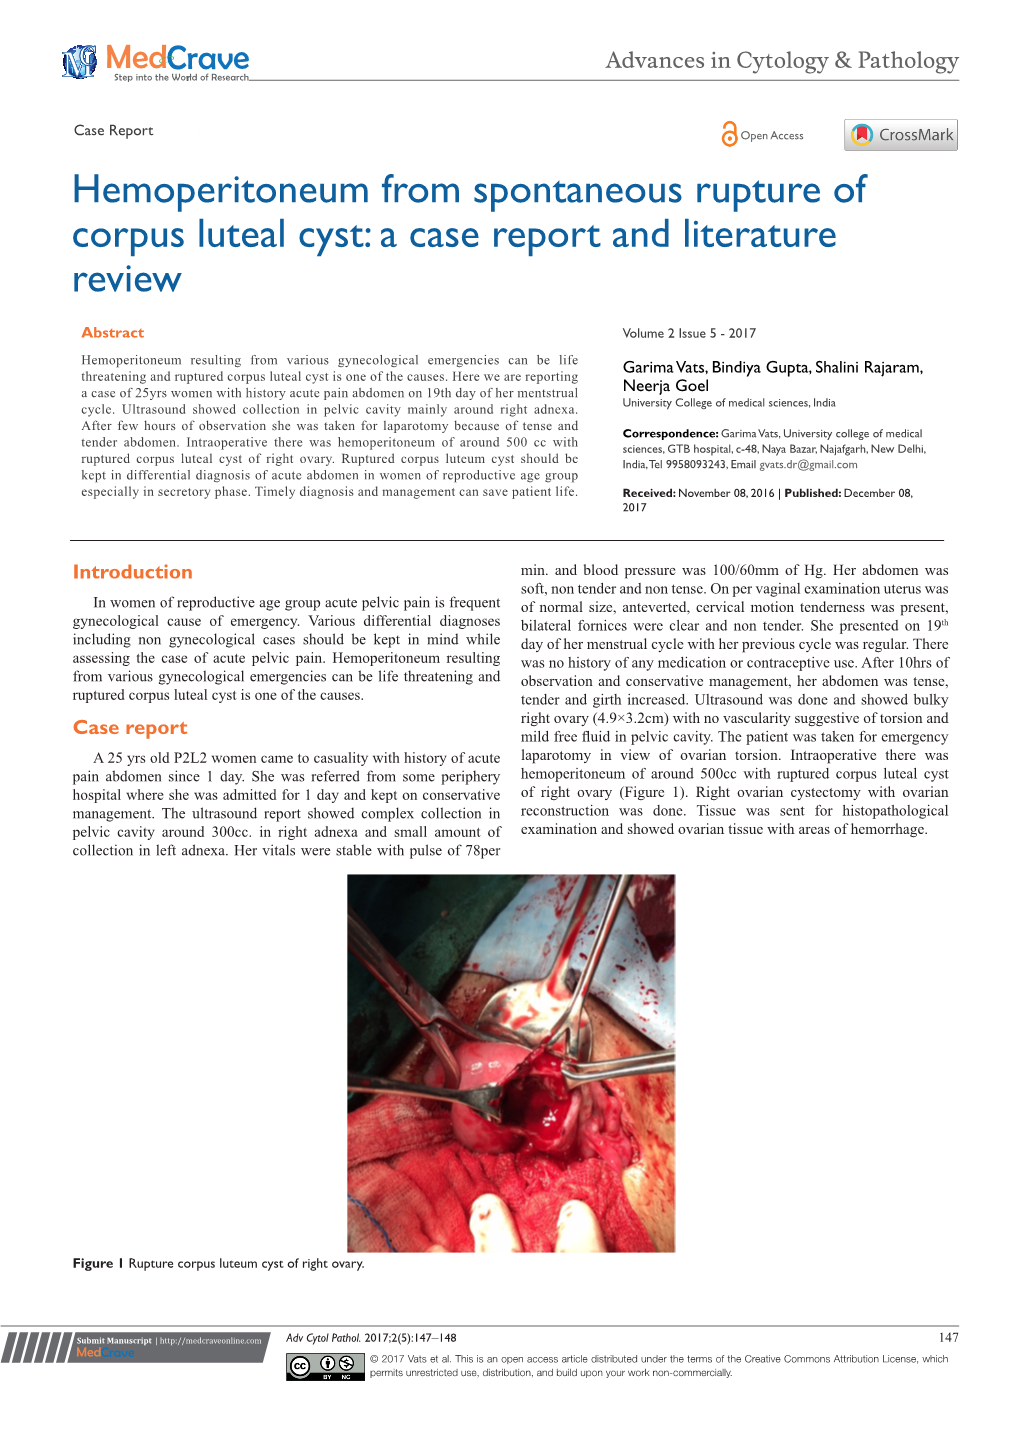 Hemoperitoneum from Spontaneous Rupture of Corpus Luteal Cyst: a Case Report and Literature Review